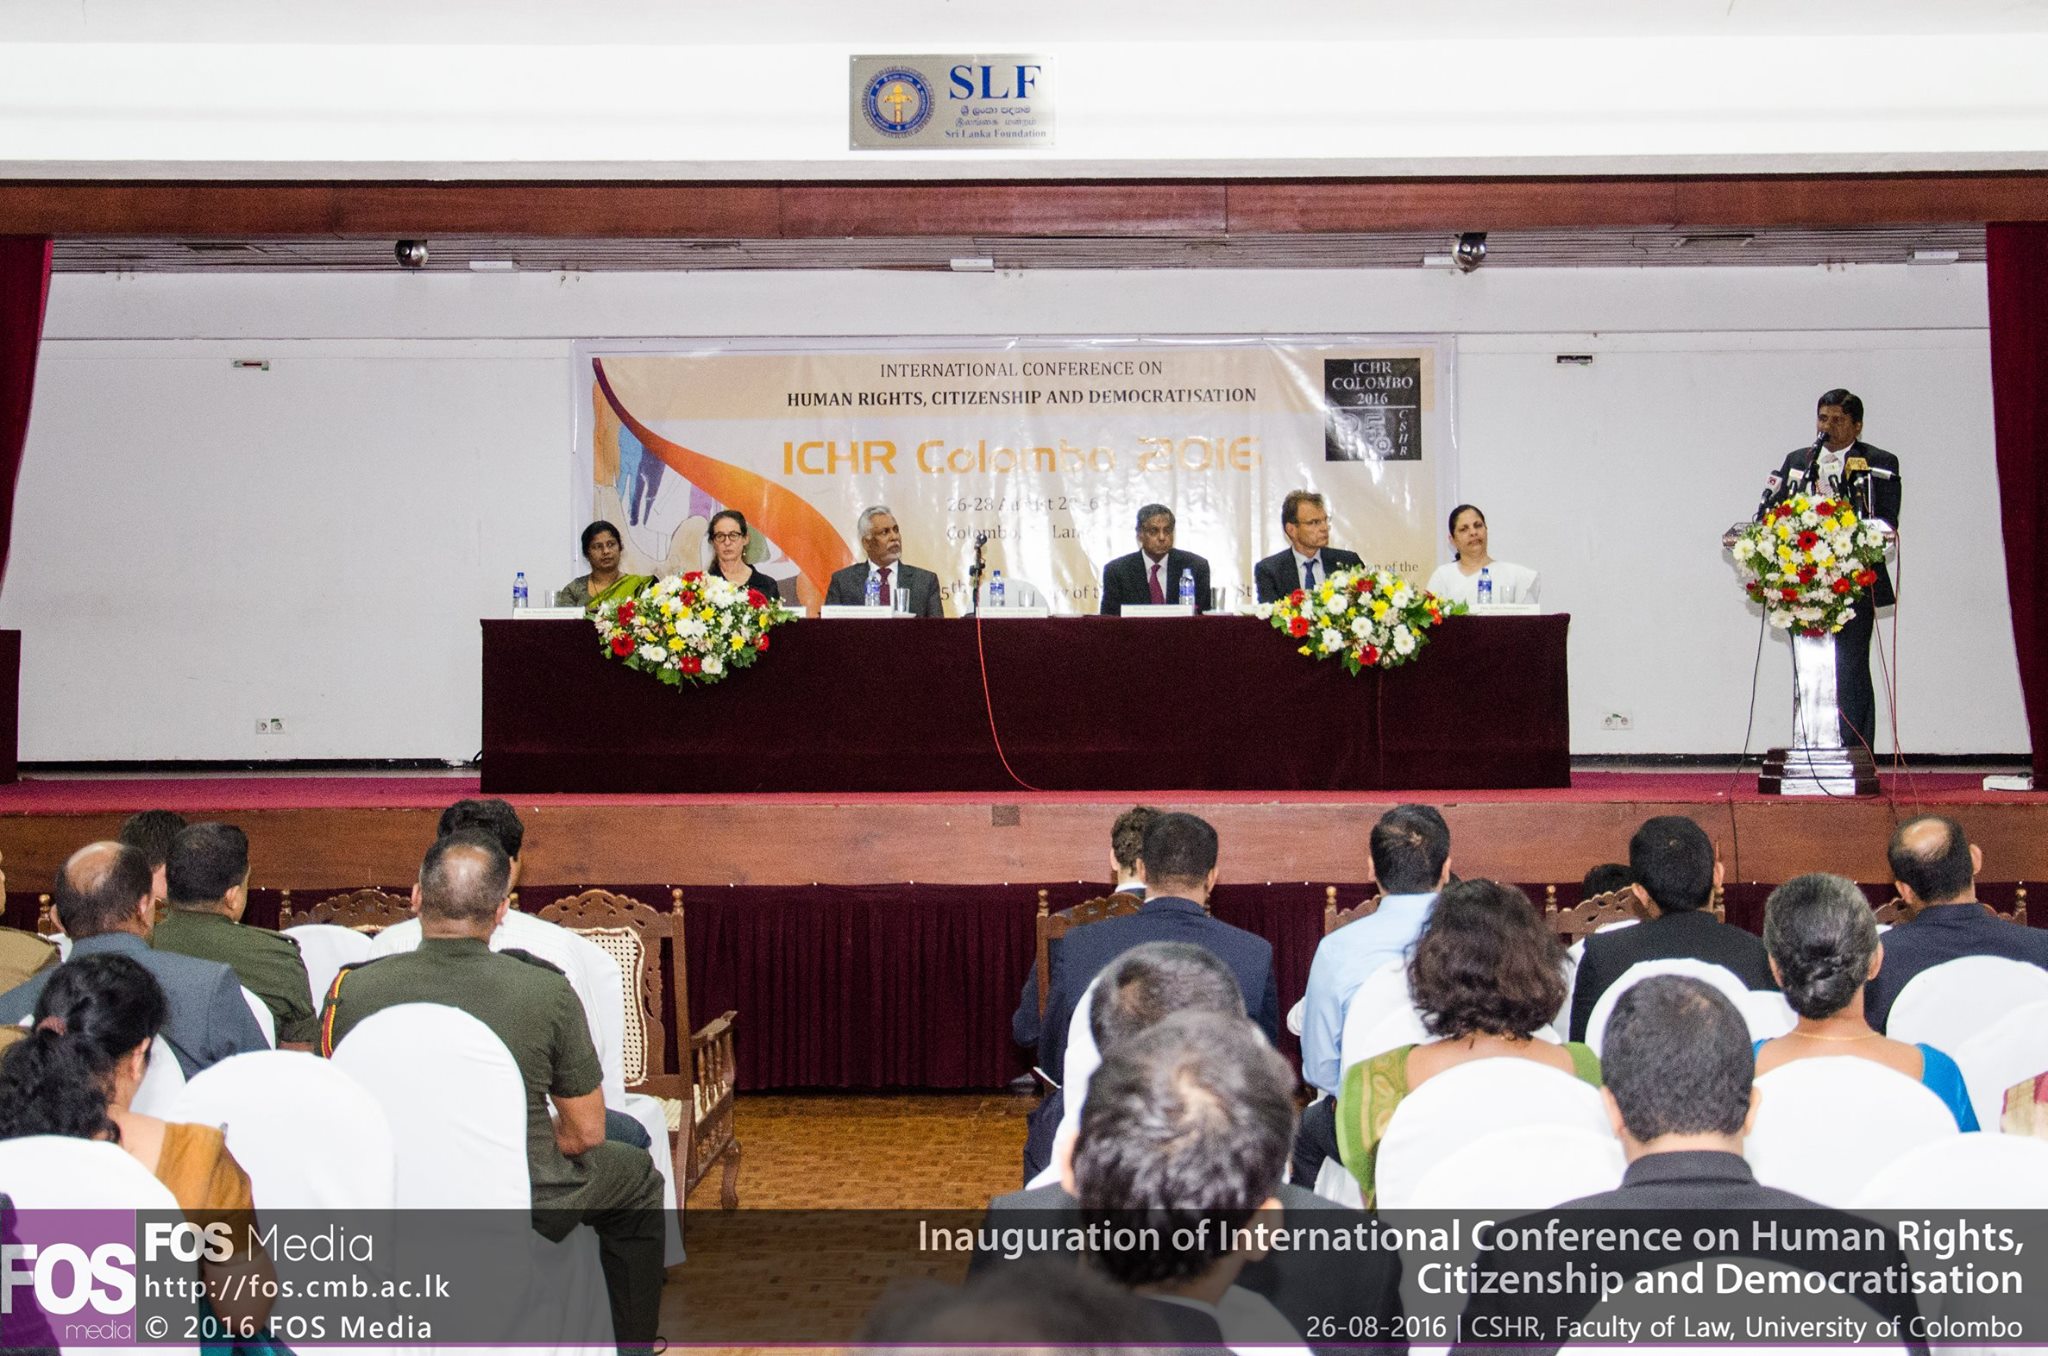 International Conference on Human Rights, Citizenship and Democratisation ICHR Colombo 2016